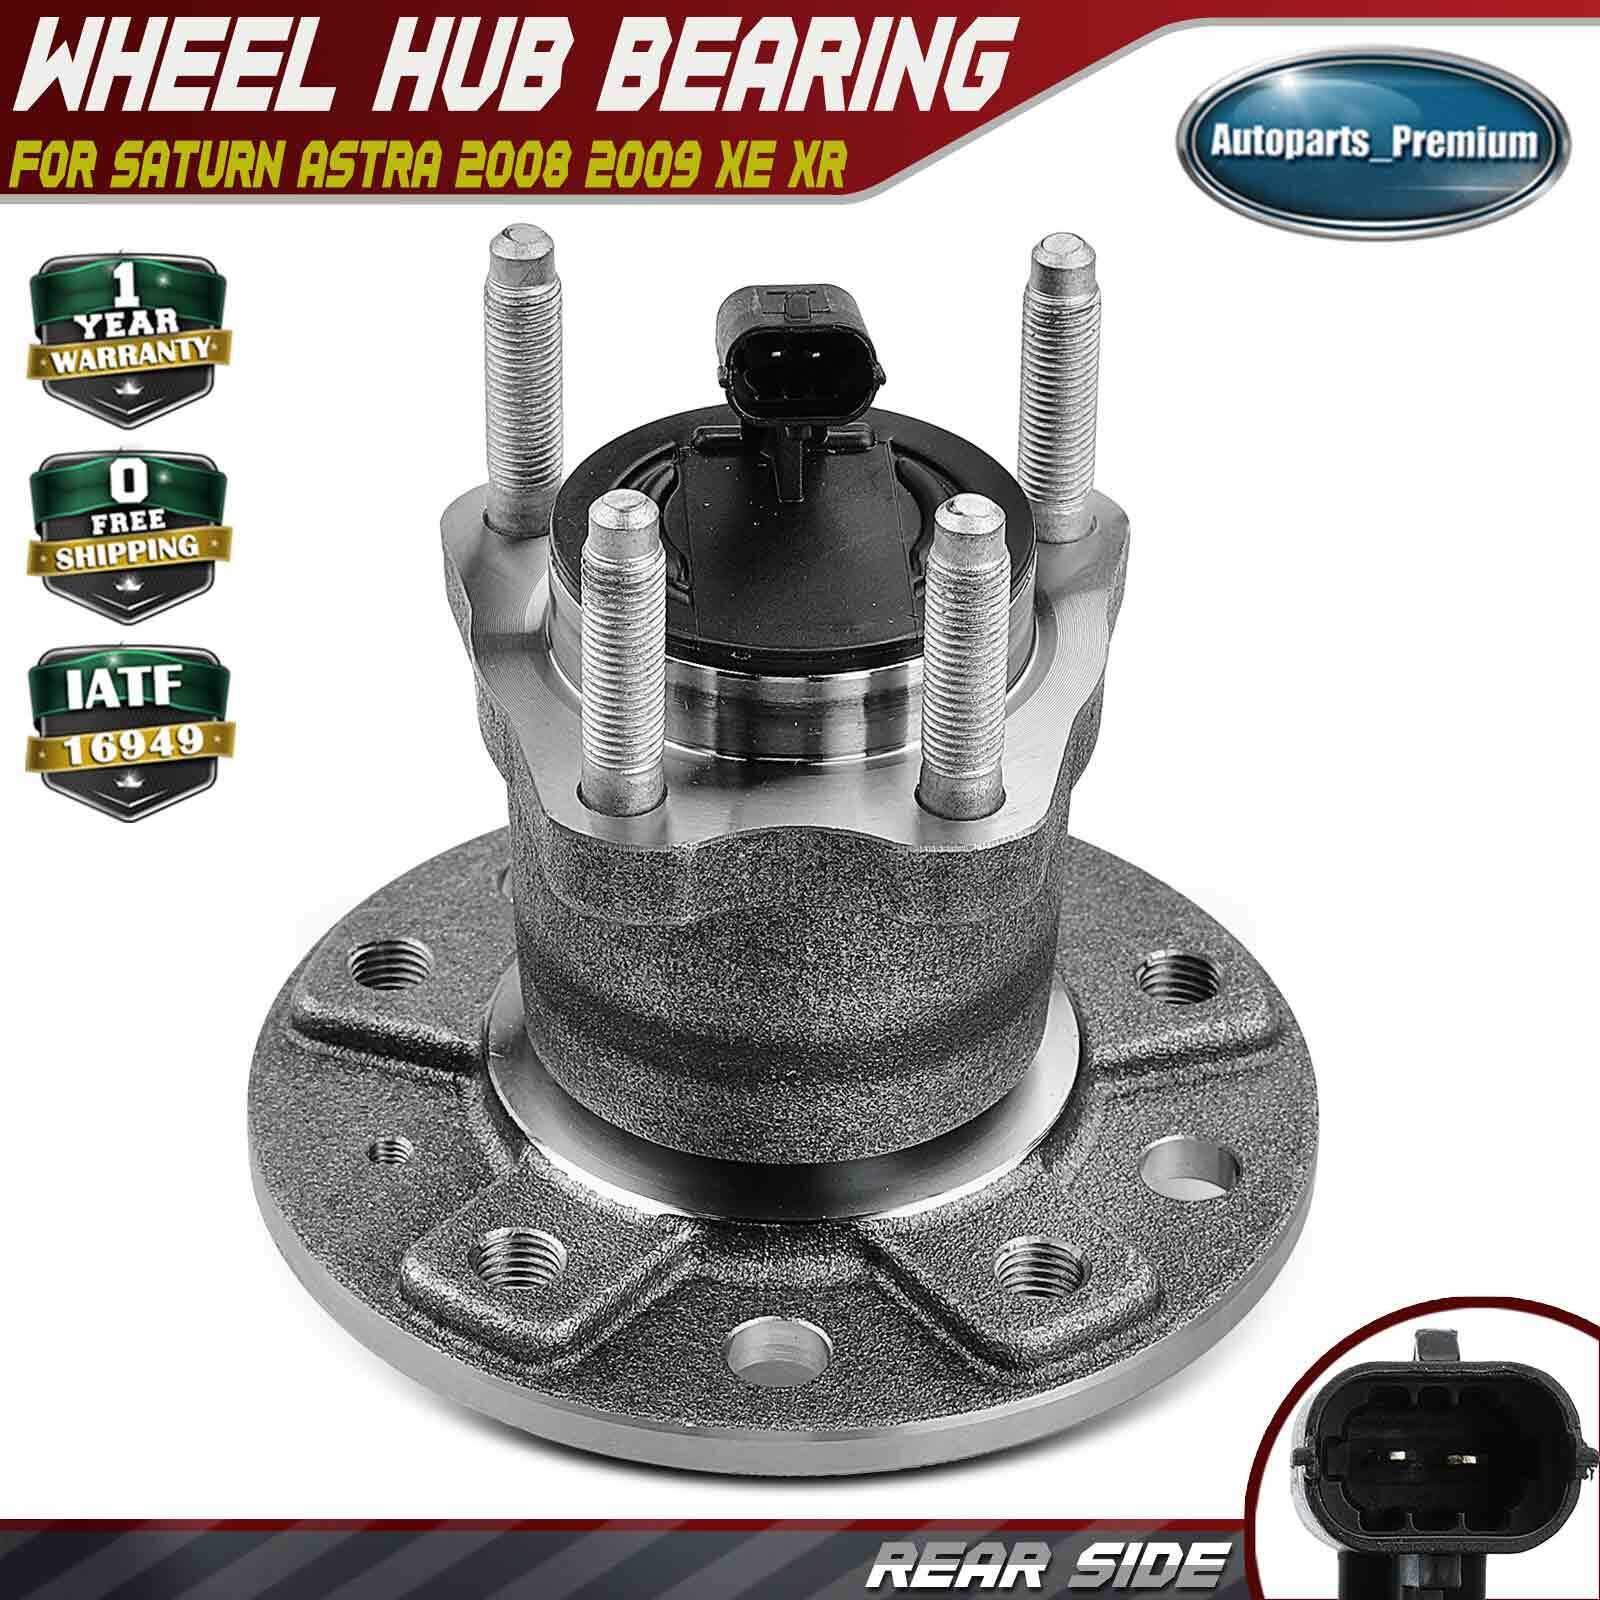 Rear Driver or Passenger Wheel Hub Bearing Assembly for Saturn Astra 2008-2009